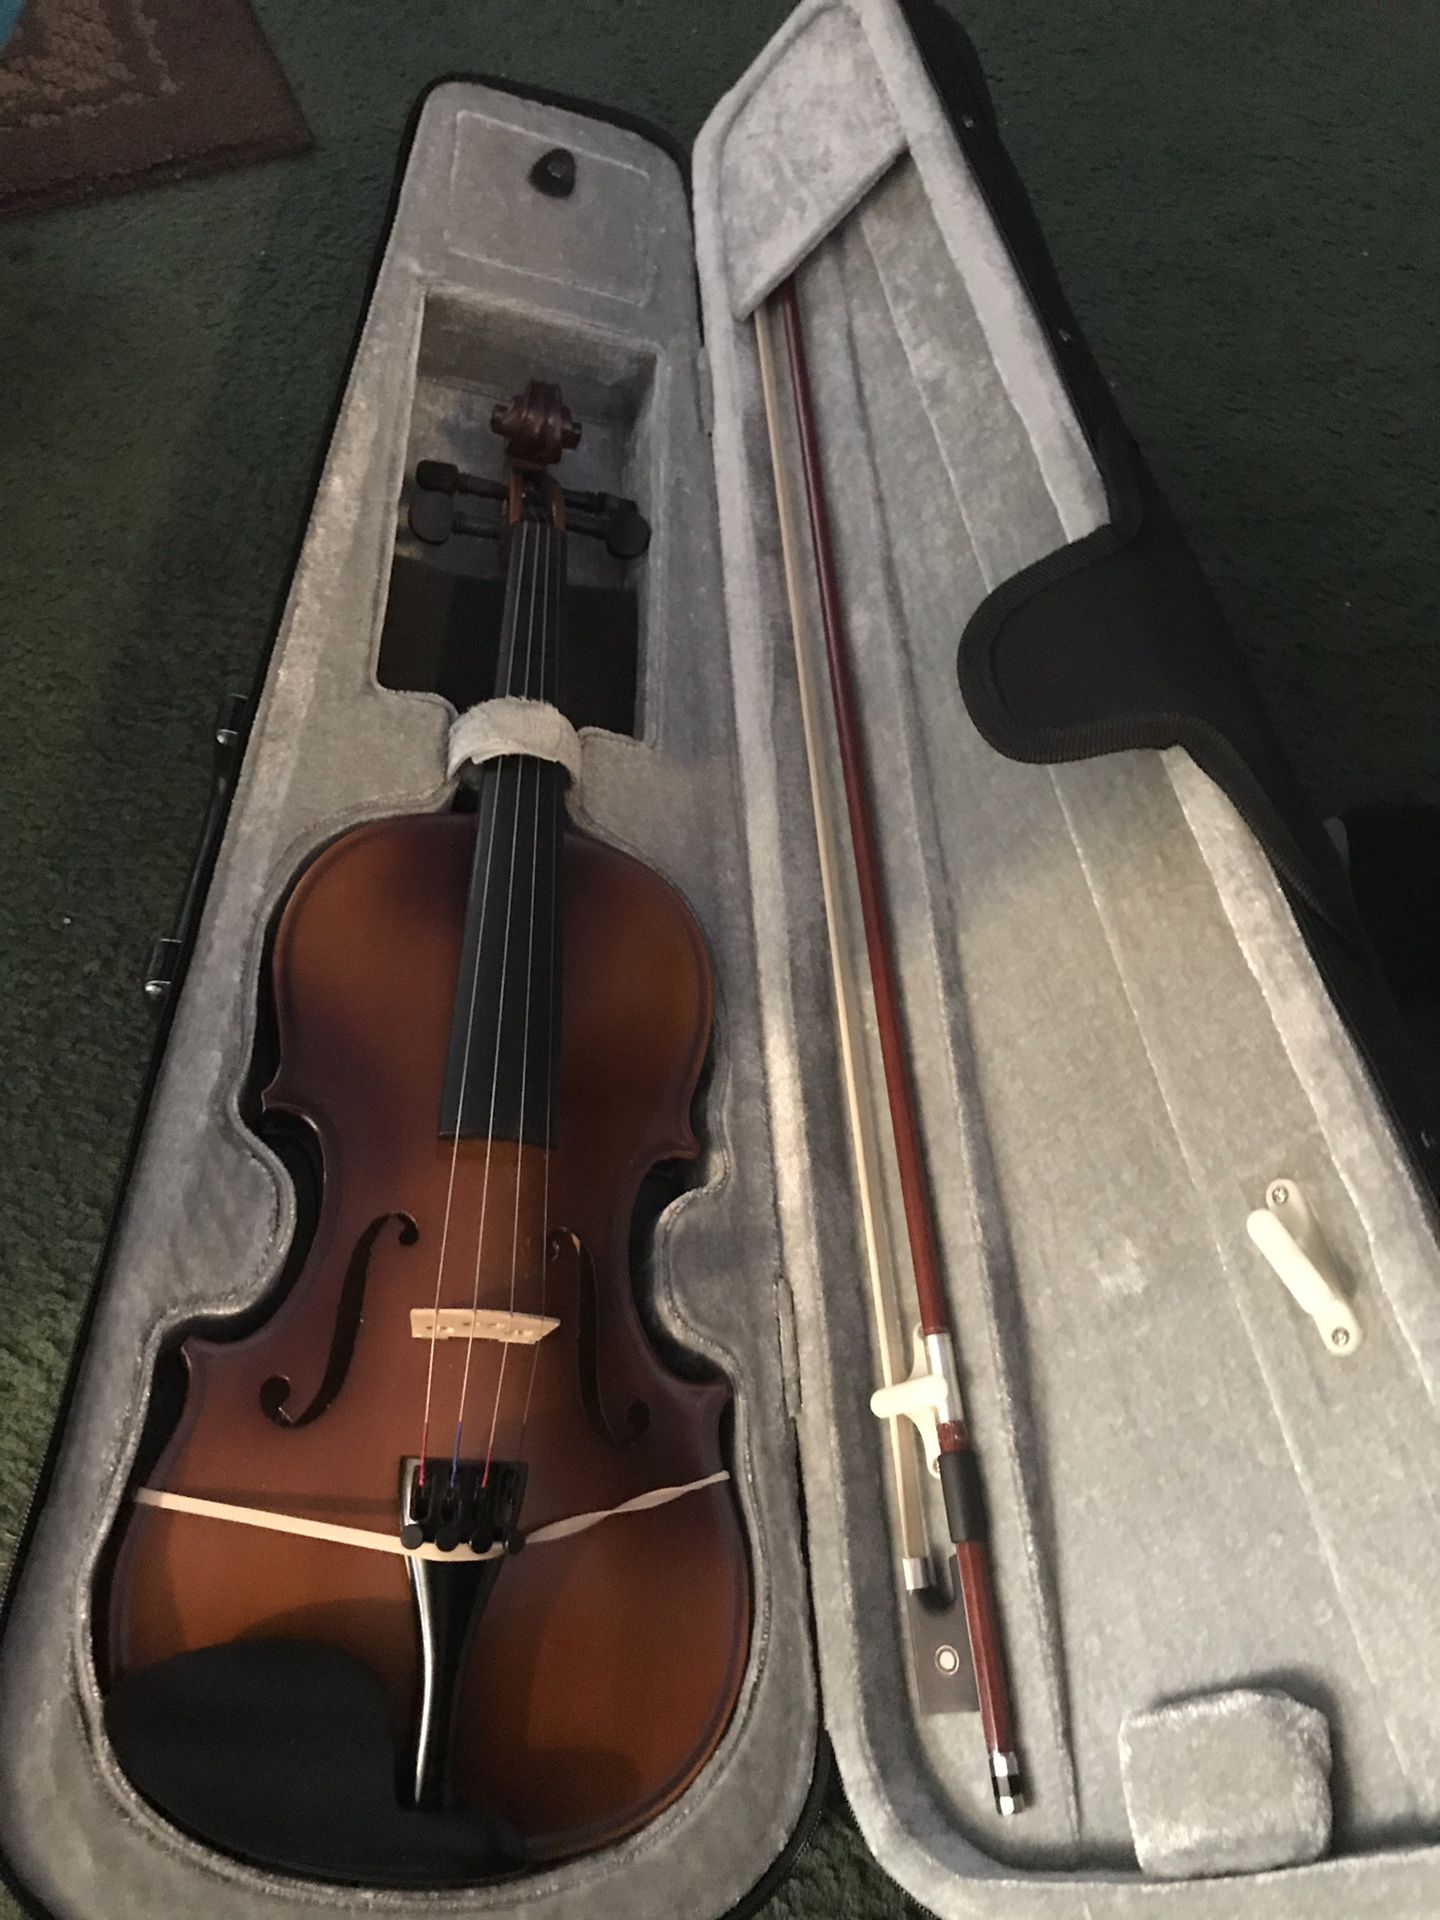 Violin size is 22” (3/4 according to chart)